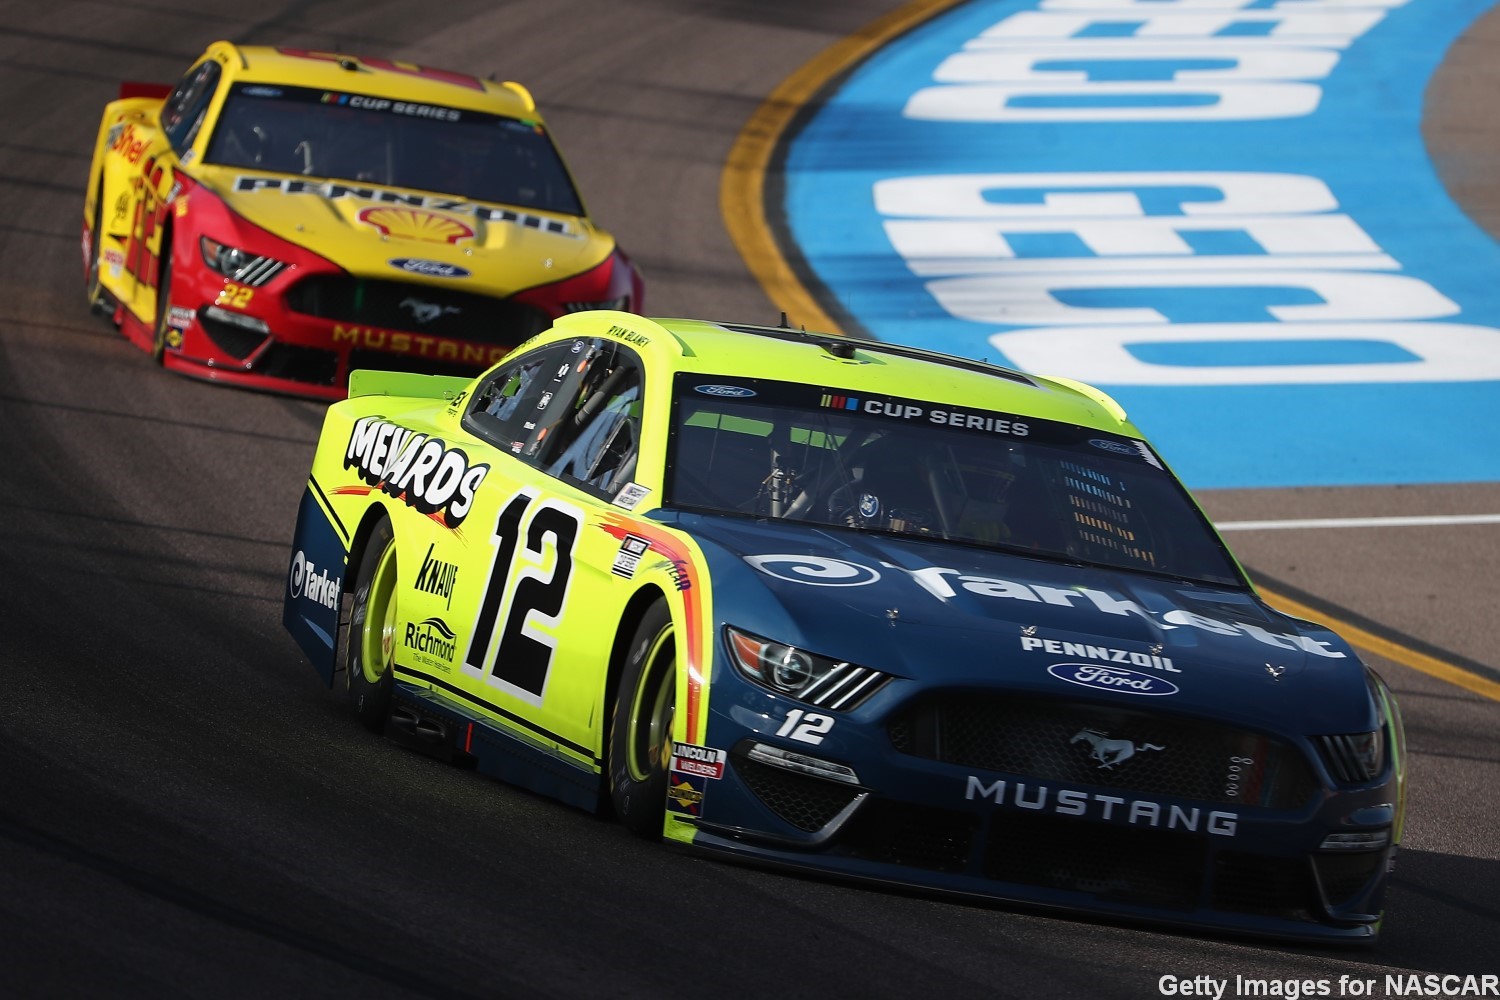 NASCAR, like IndyCar, will race on. Cancelling or postponing races is not on the cards......yet.